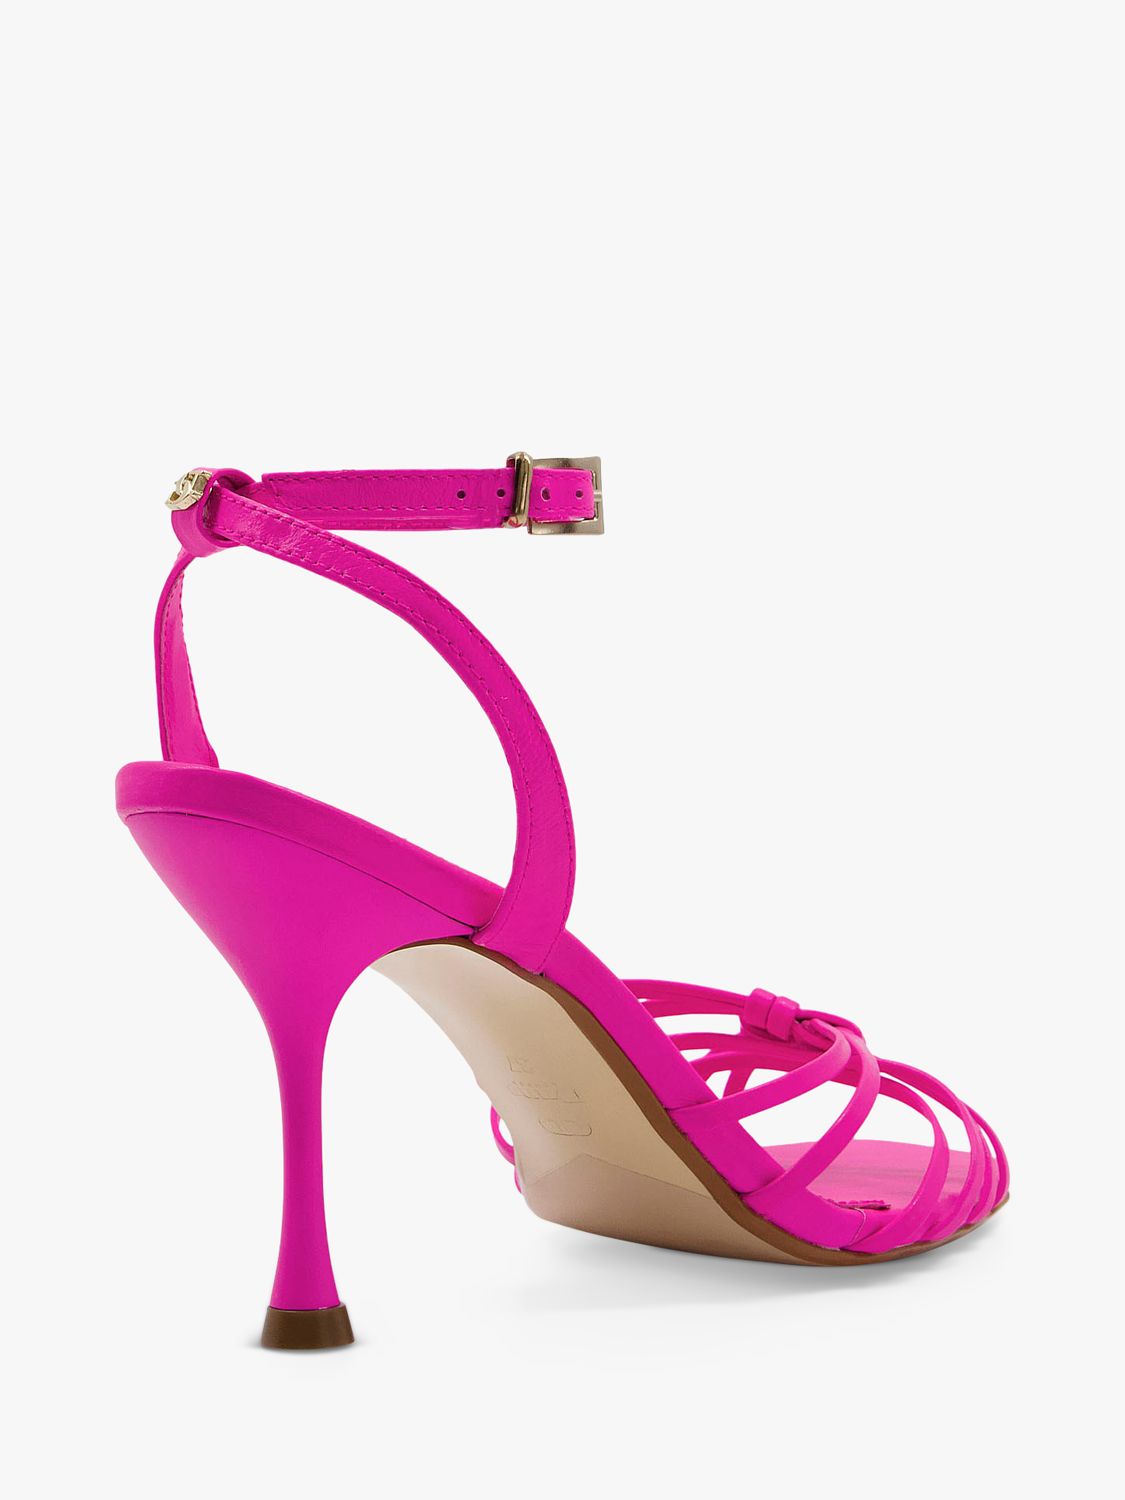 Dune Manner Leather Strappy Sandals at John Lewis & Partners